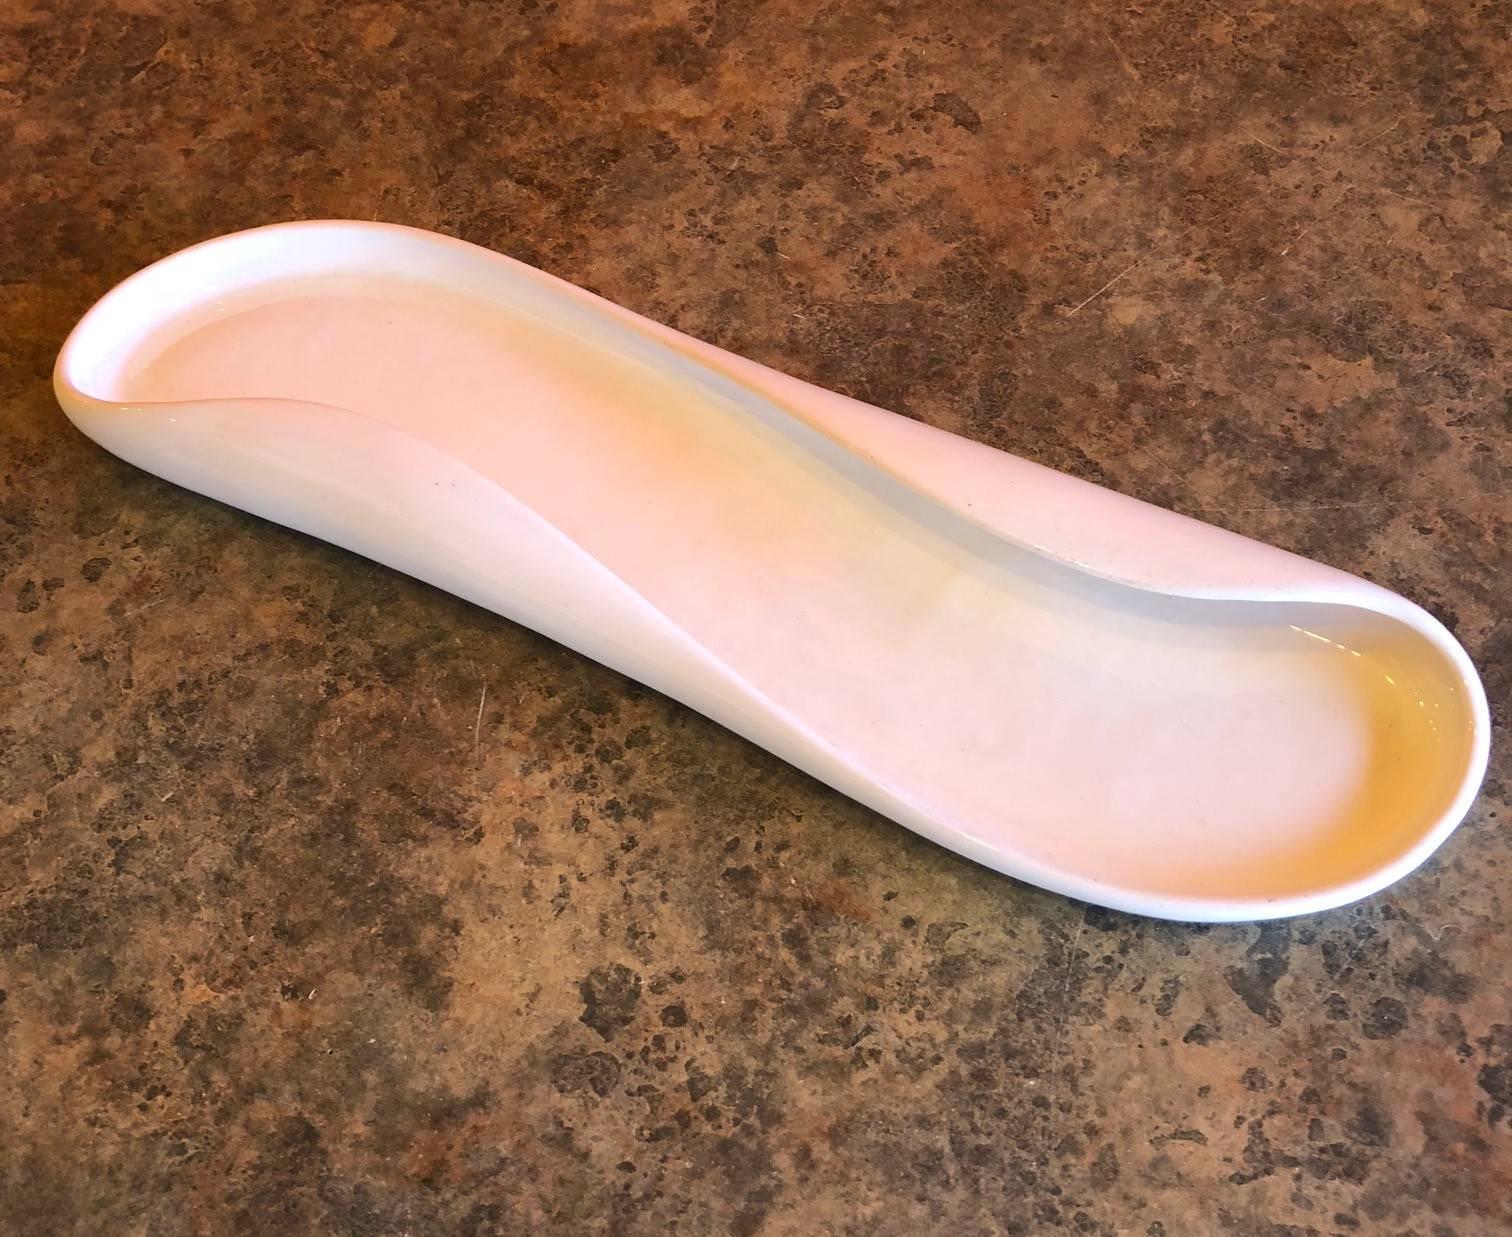 Stylish and functional American modern celery tray by Russel Wright for Steubenville Pottery of Ohio, circa 1940s. The ultramodern design emphasizes soft cures and simple glazing. The piece is in excellent vintage contain with no chips or cracks or